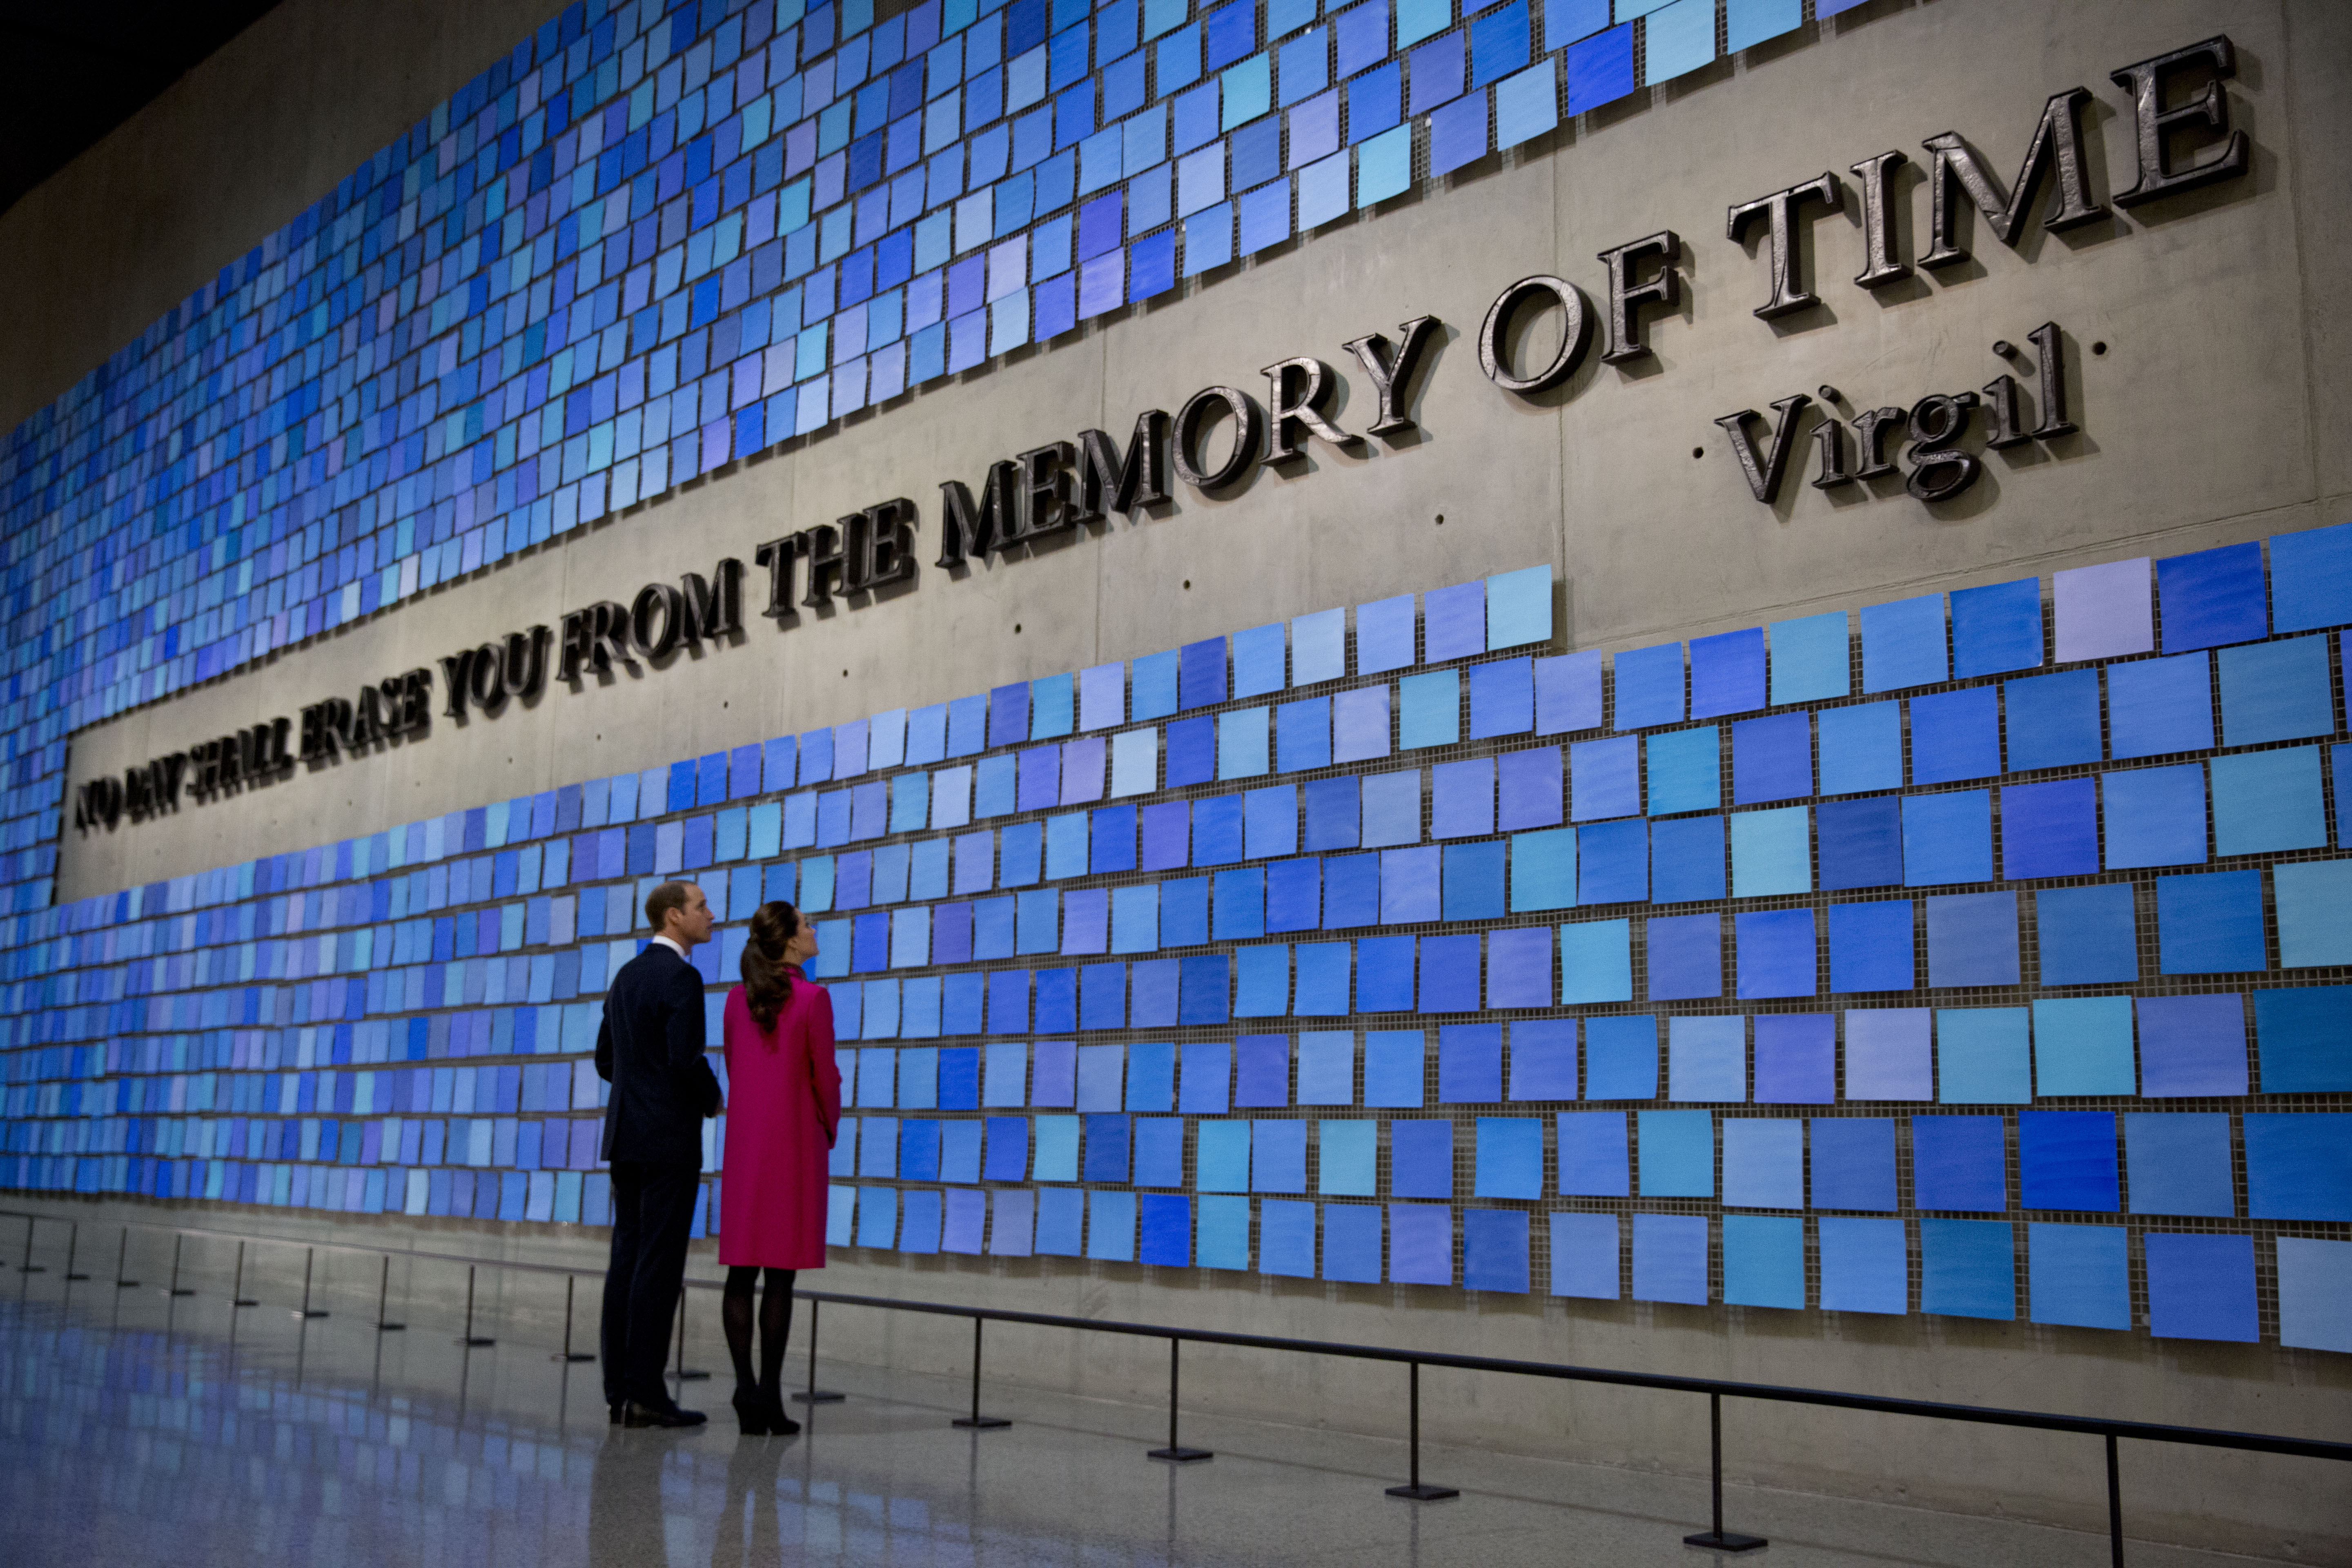 Prince William, Duke of Cambridge, and Catherine, Duchess of Cambridge, view artist Spencer Finch’s work “Trying to Remember the Color of the Sky on That September Morning” in Memorial Hall at the Museum. The artwork features the Vigil quote, “No day shall erase you from the memory of time.” The quote is surrounded by 2,983 squares of Fabriano paper hand-painted different shades of blue.